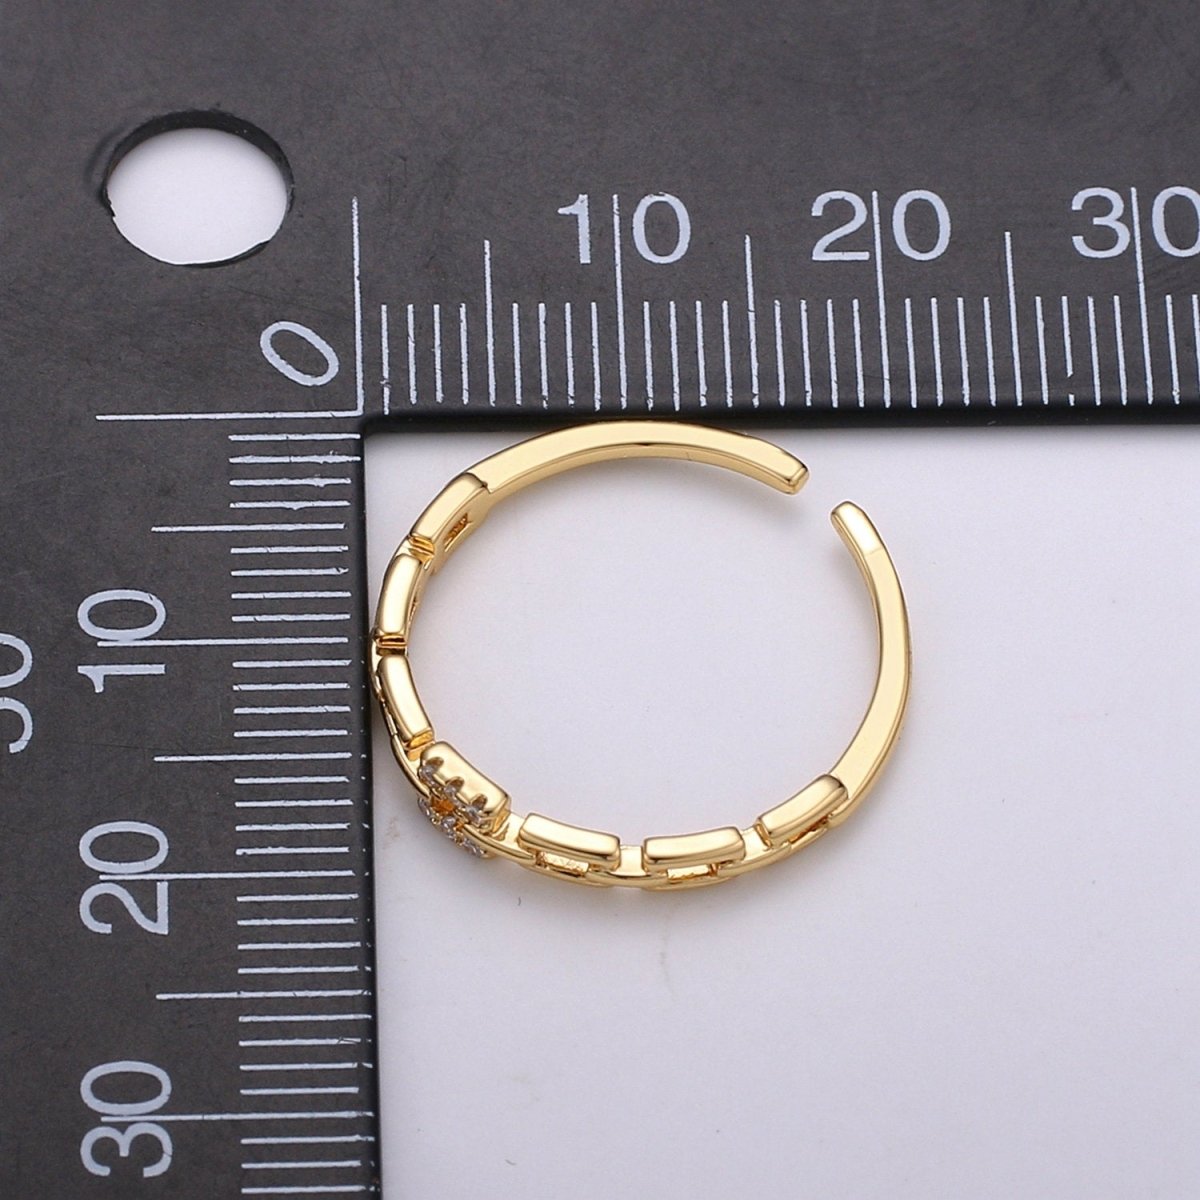 Paper Clip Chain Ring in Gold, Vermeil Ring • Minimalist Ring • Stacking Ring • Dainty Open Adjustable Ring for Christmas Gifts R-103 - DLUXCA